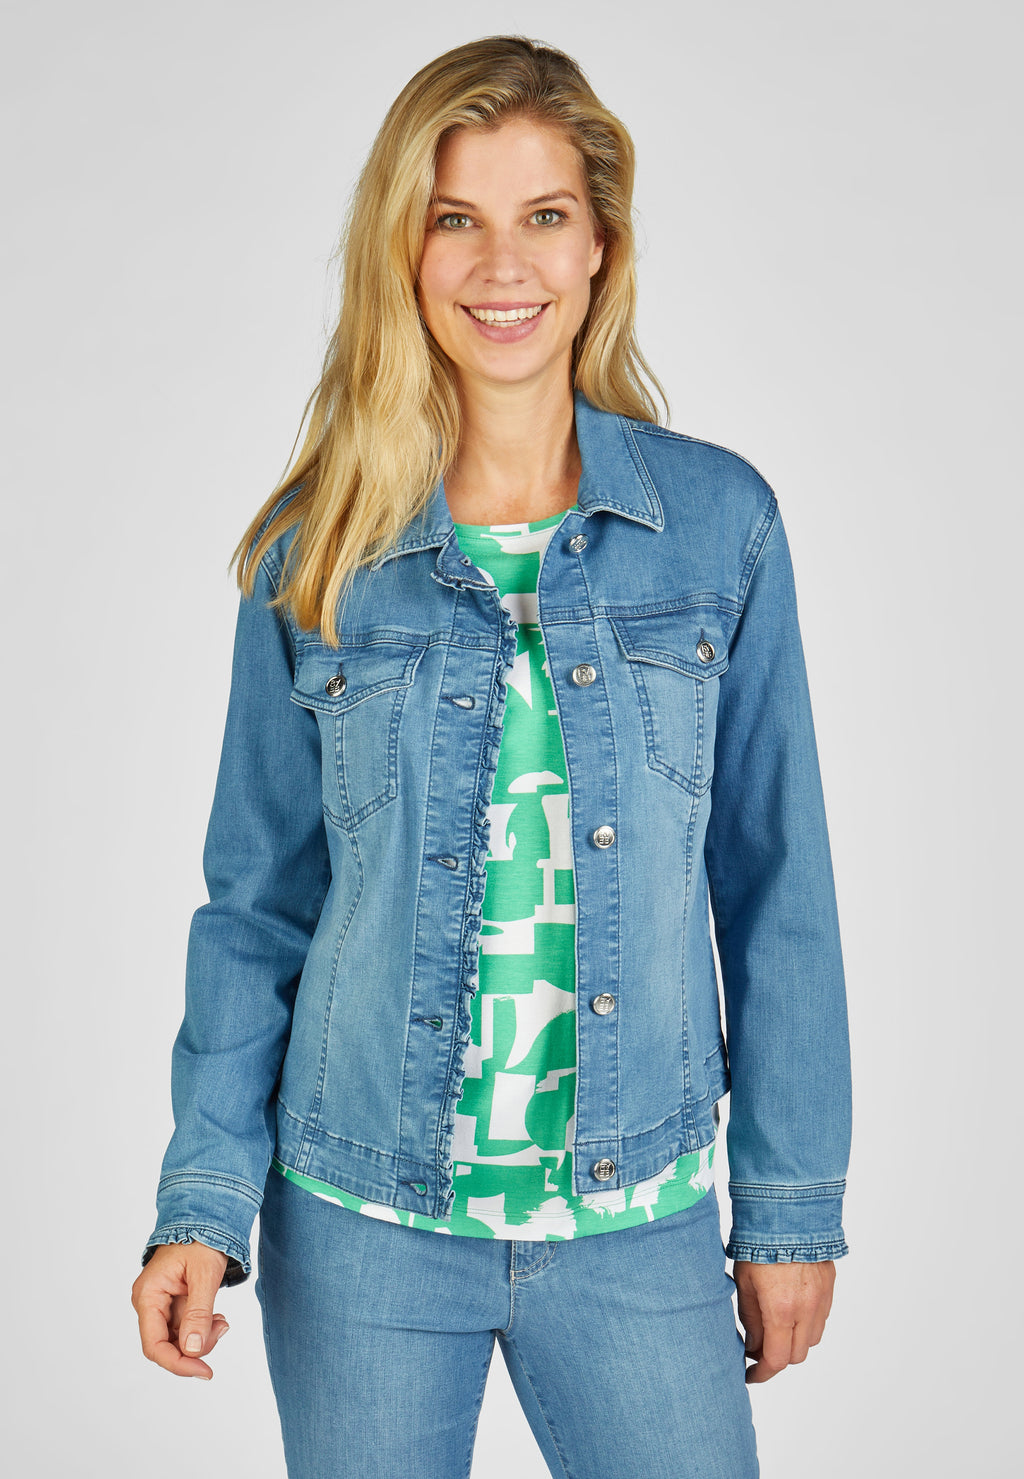 Rabe frill denim jacket in blue, product code 52-214020